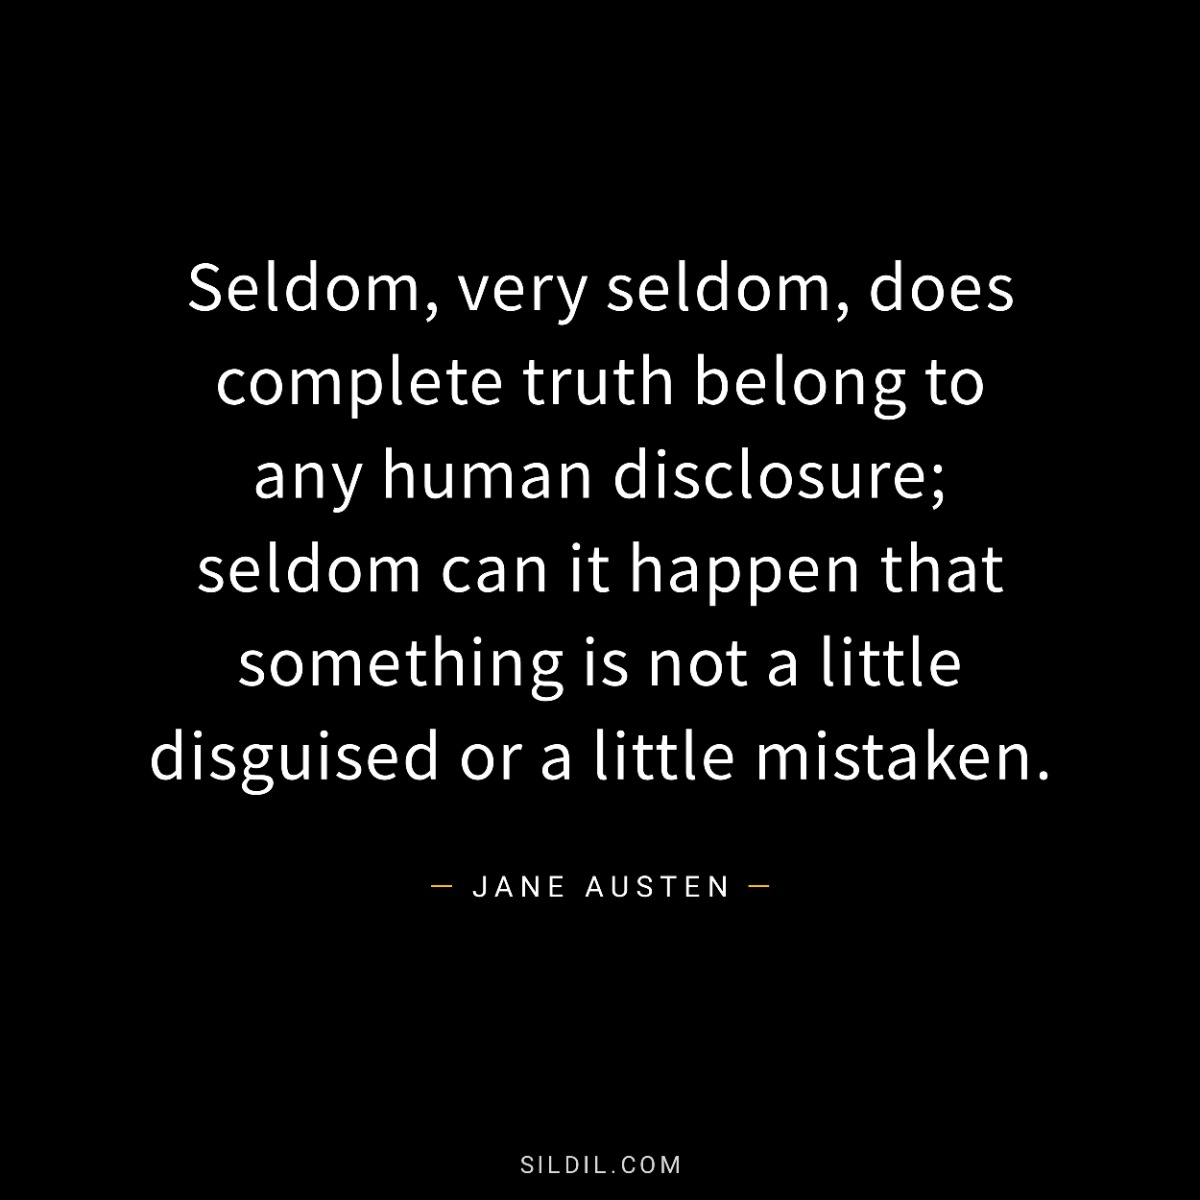 Seldom, very seldom, does complete truth belong to any human disclosure; seldom can it happen that something is not a little disguised or a little mistaken.